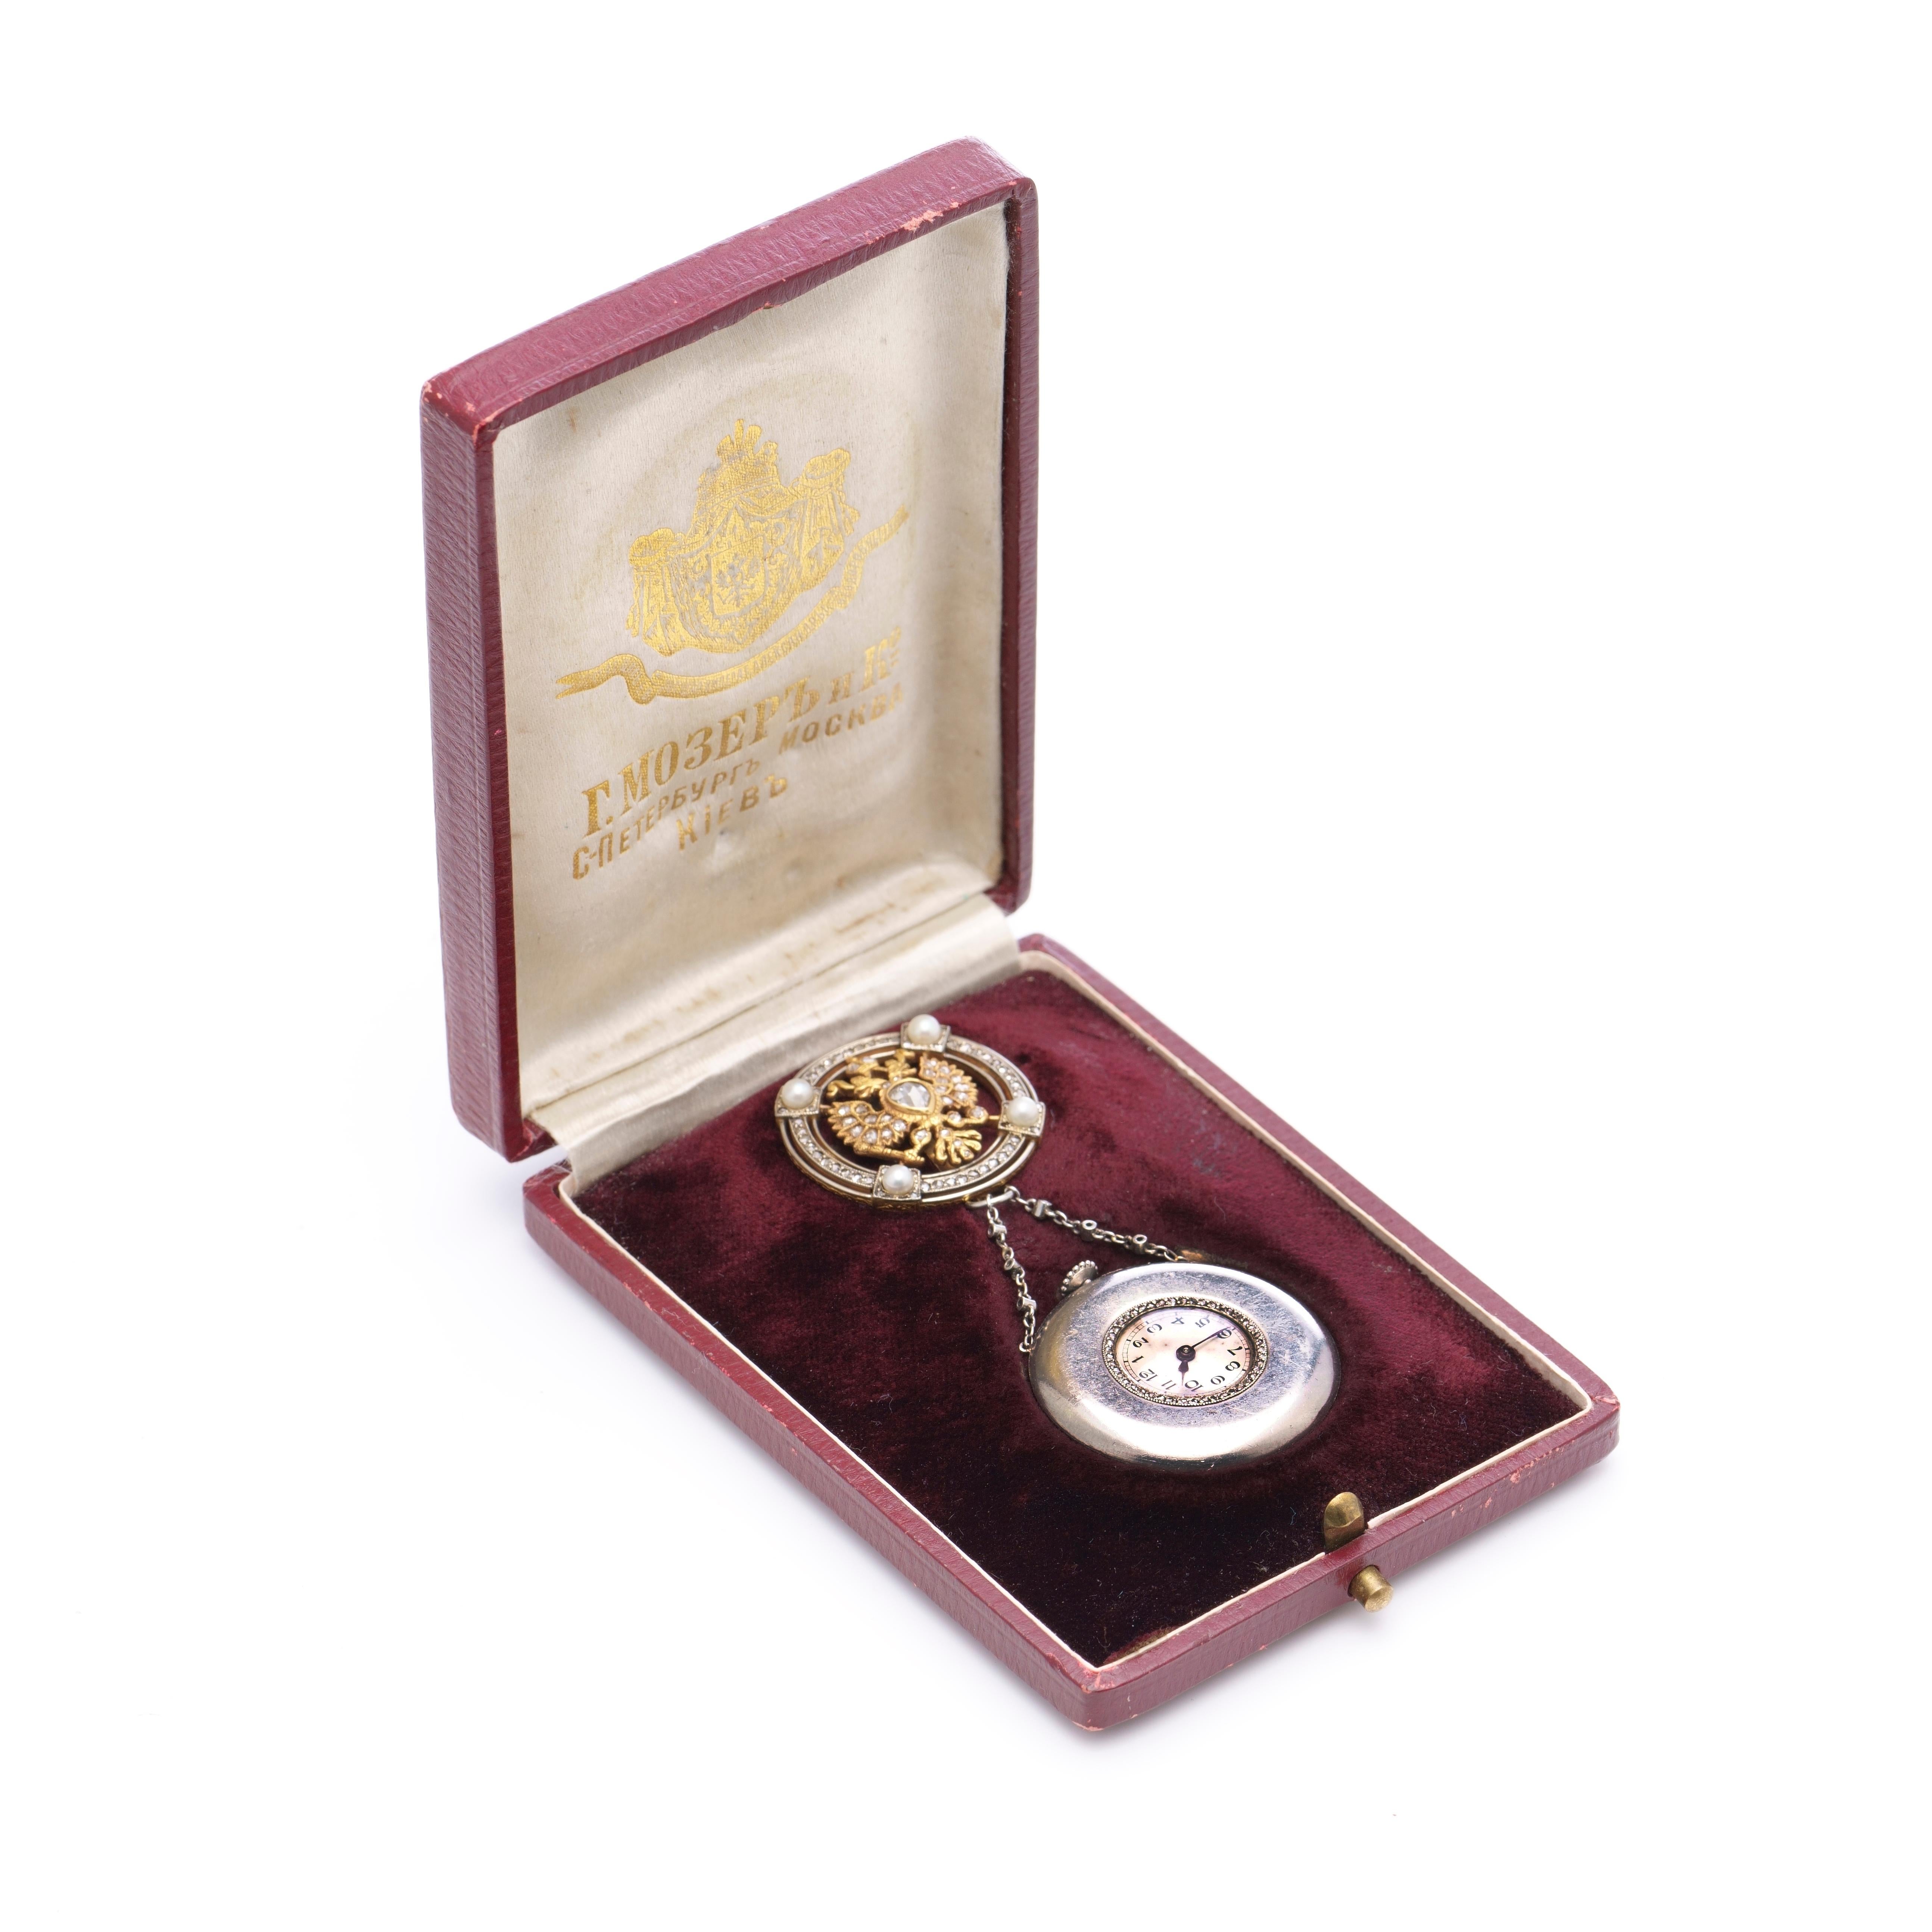 Russian Imperial presentation jewelled platinum and gold pendant watch
Made by Moser & Co
Made in St. Petersburg, 1908-1917

The circular brooch centered with a gold, gem-set Imperial double-headed eagle within a border set with diamonds and pearls,